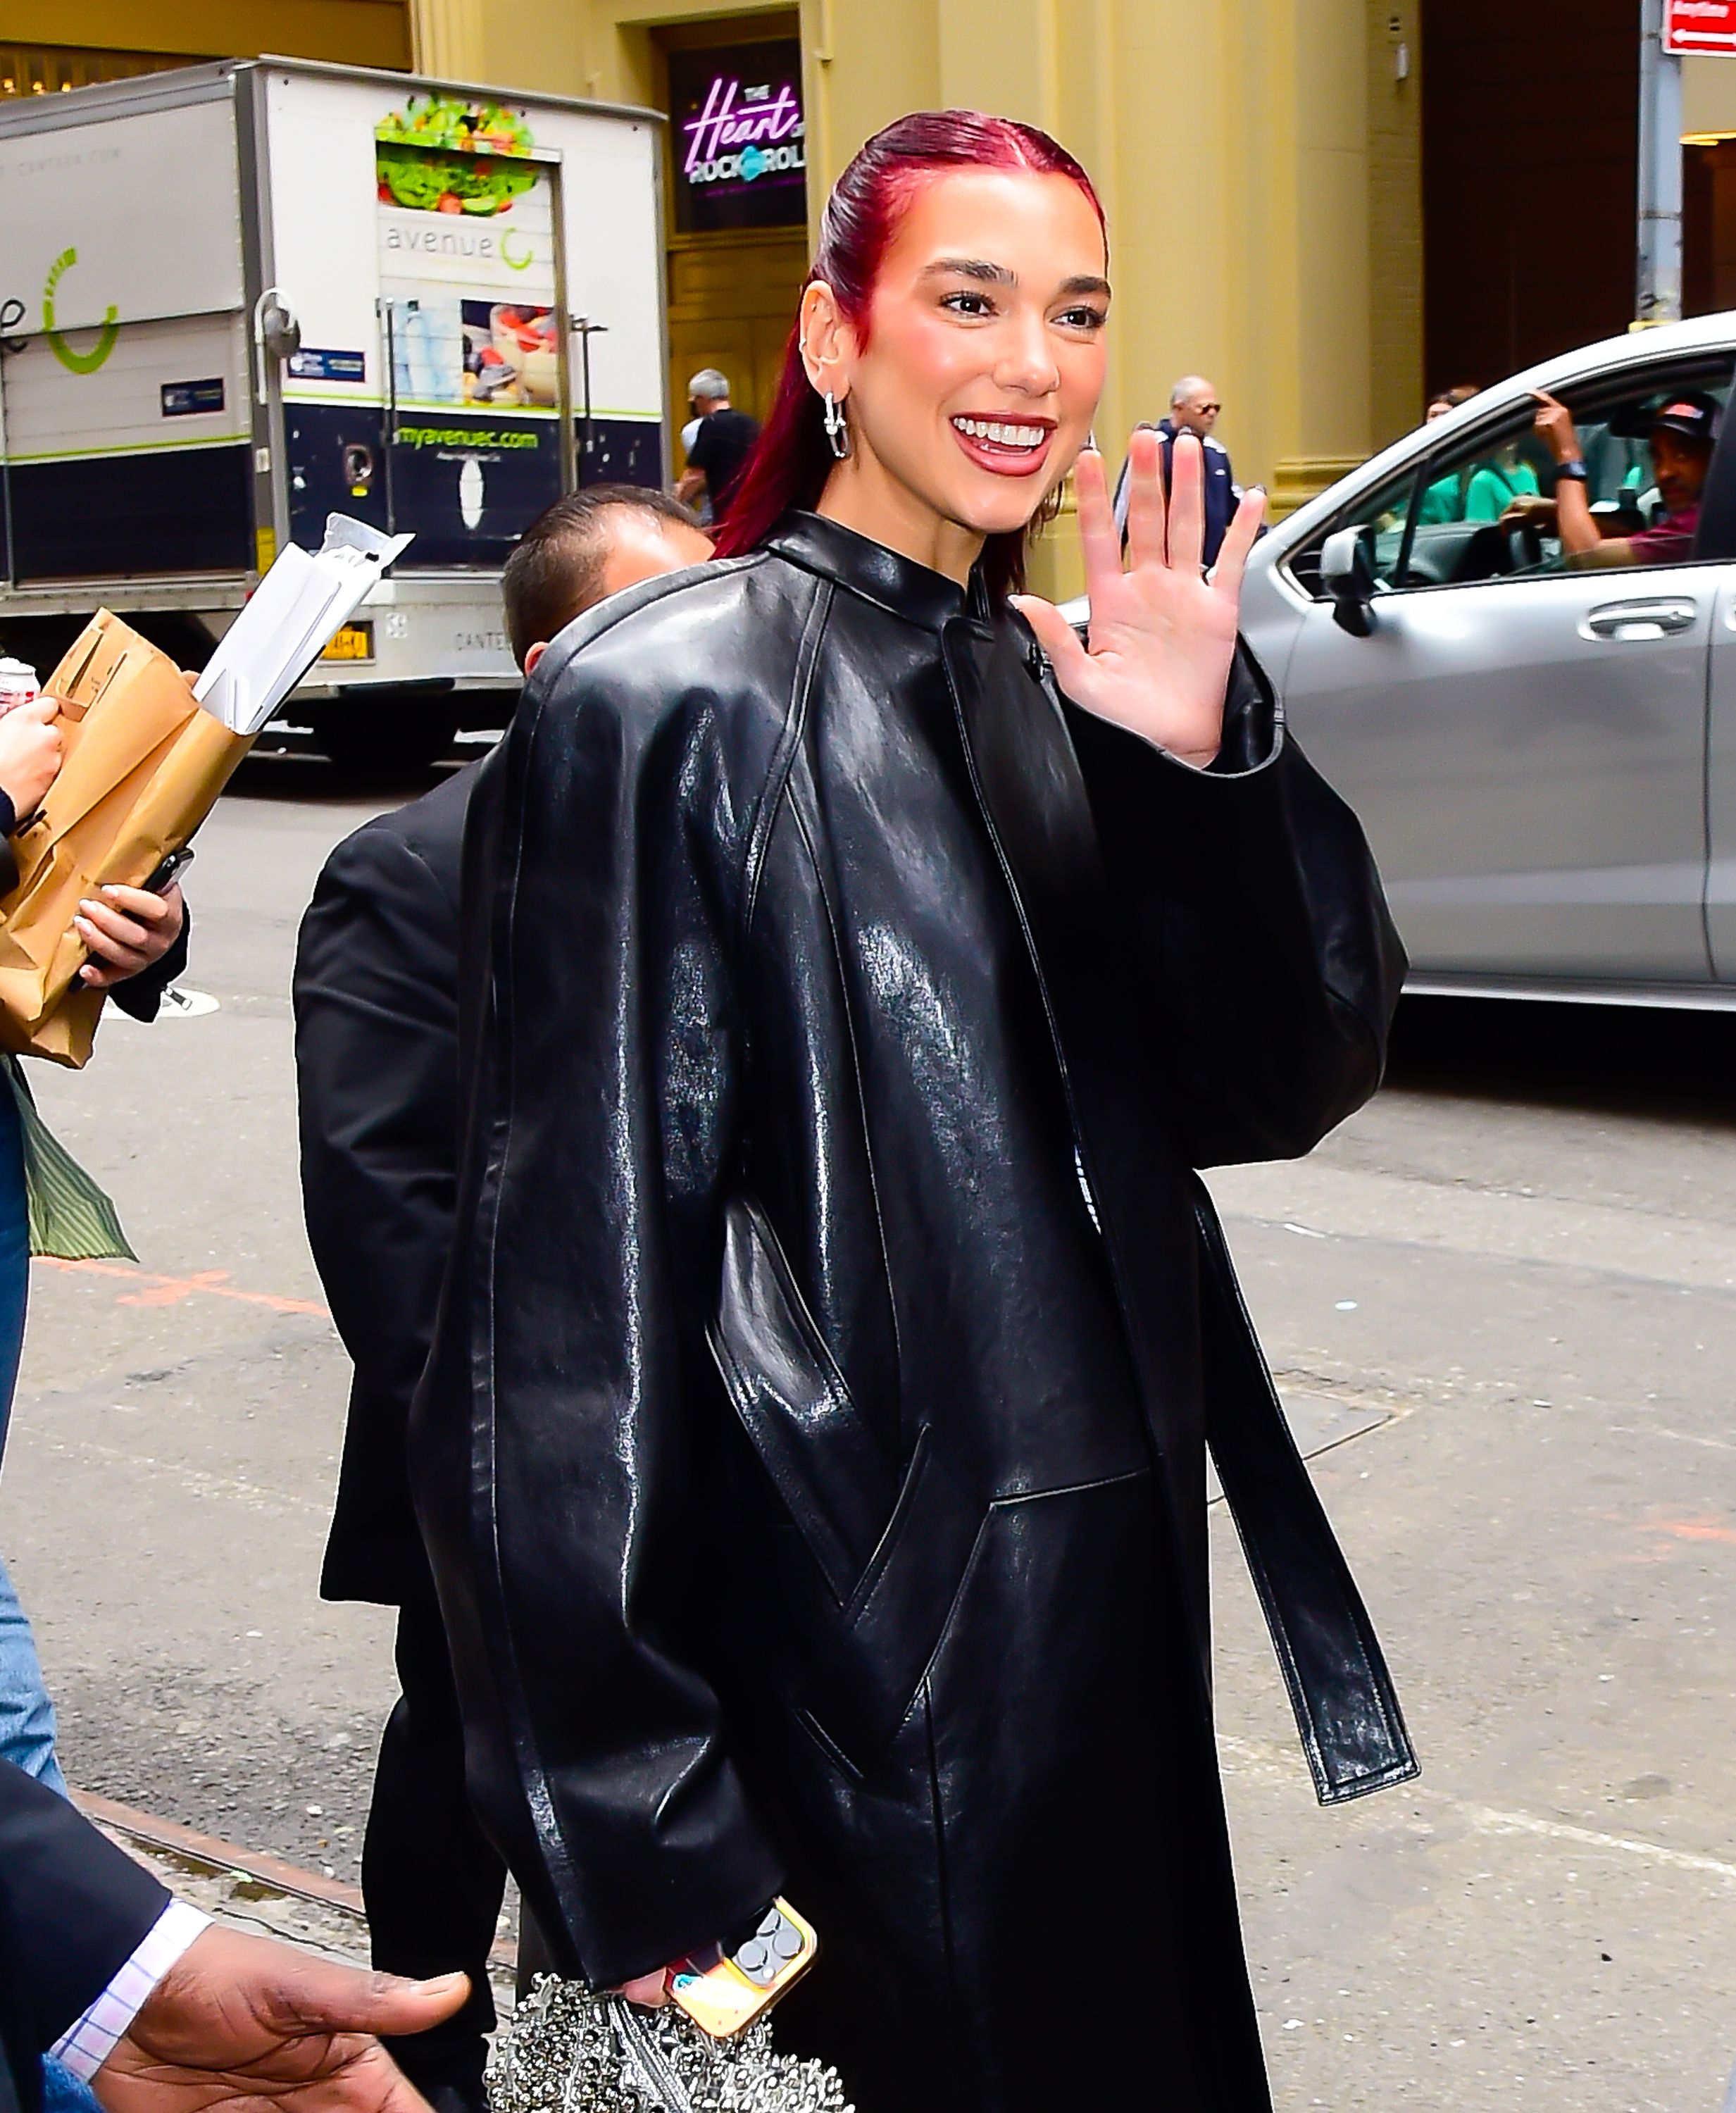 Woman in a black leather outfit waving